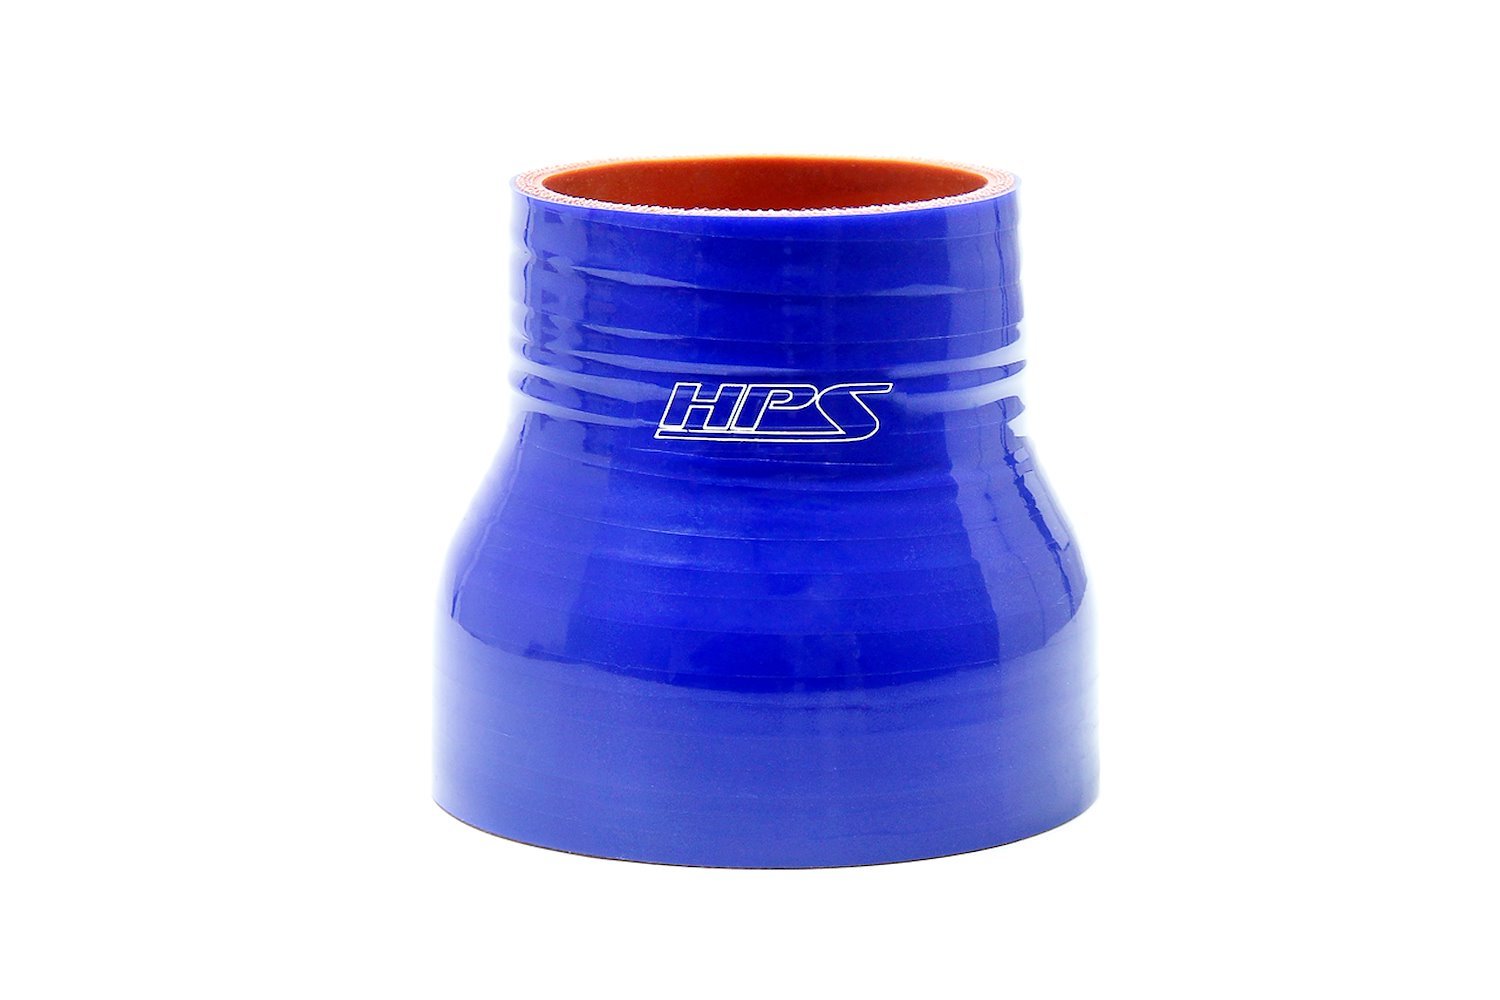 HTSR-175-200-L4-BLUE Silicone Reducer Hose, High-Temp 4-Ply Reinforced, 1-3/4 in. - 2 in. ID, 4 in. Long, Blue